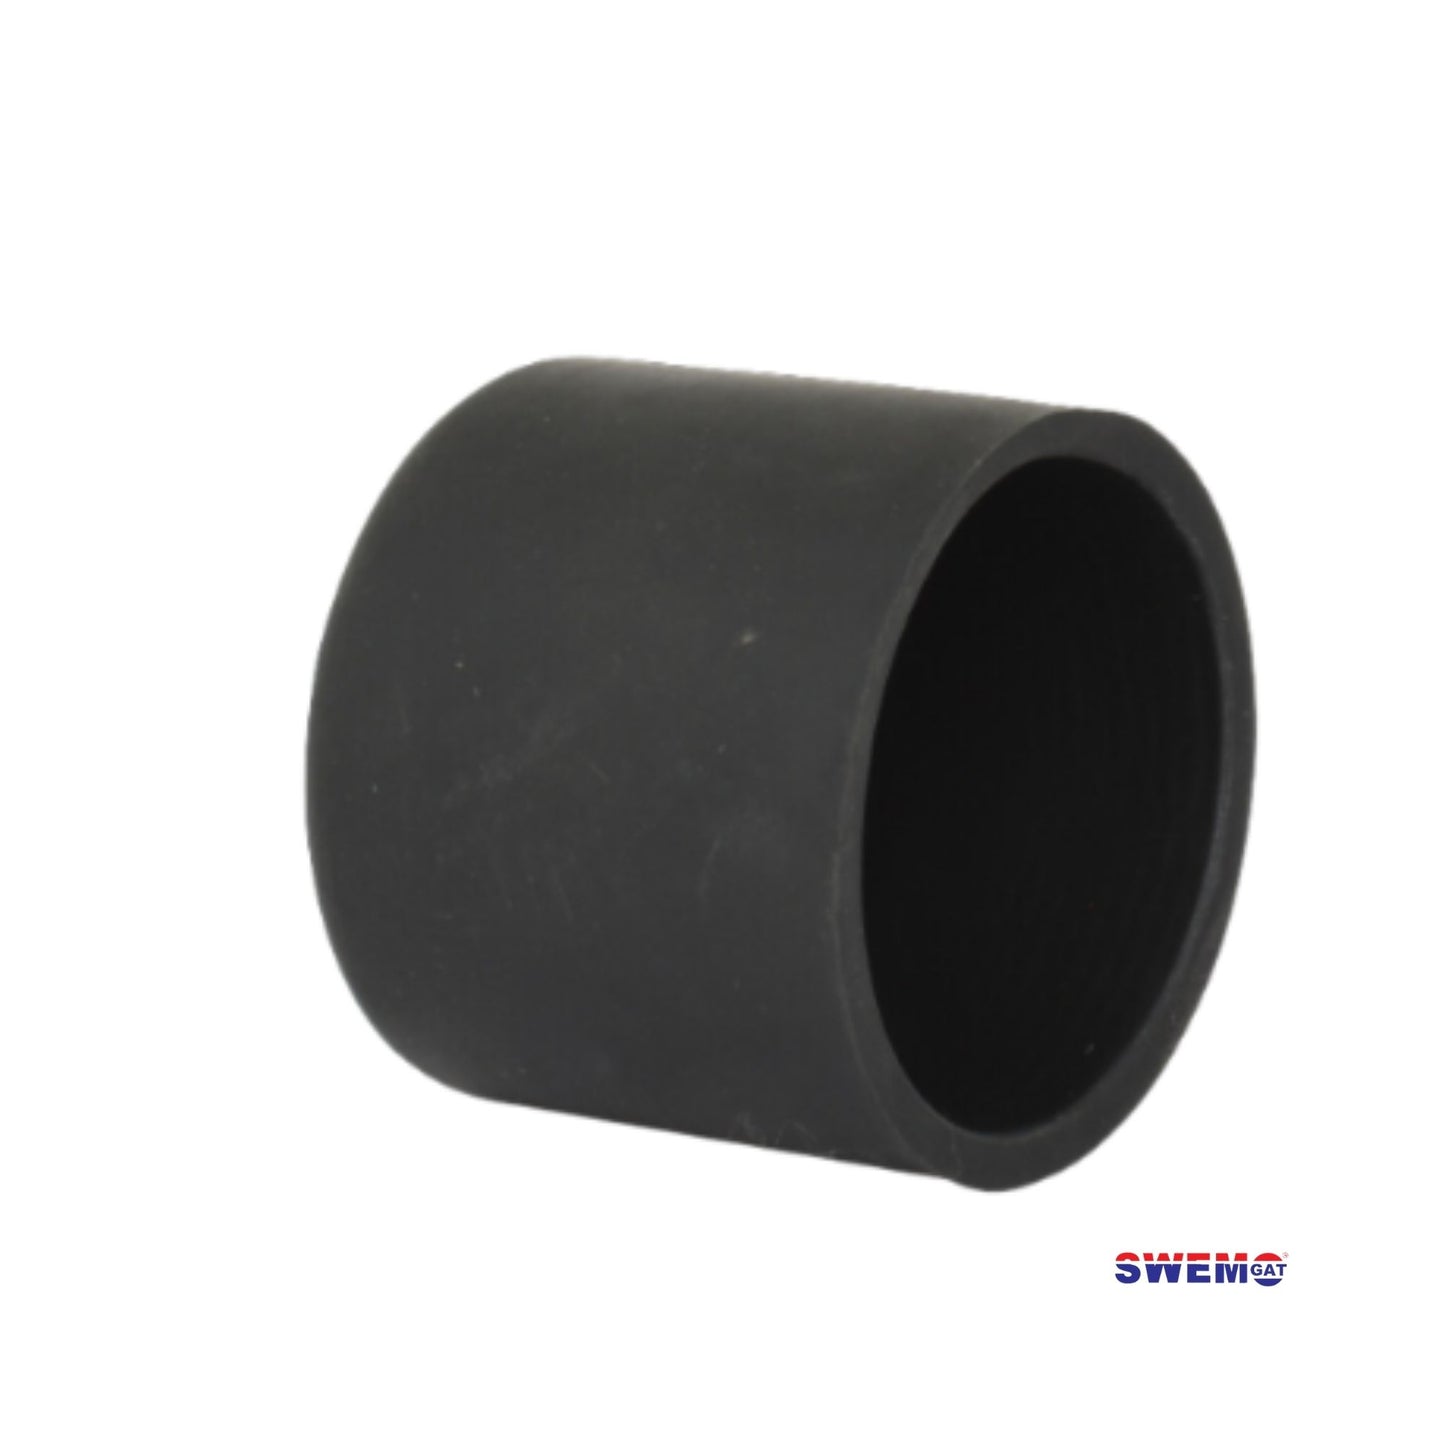 EPDM rubber end stop for 50mm Solar Panel pipe